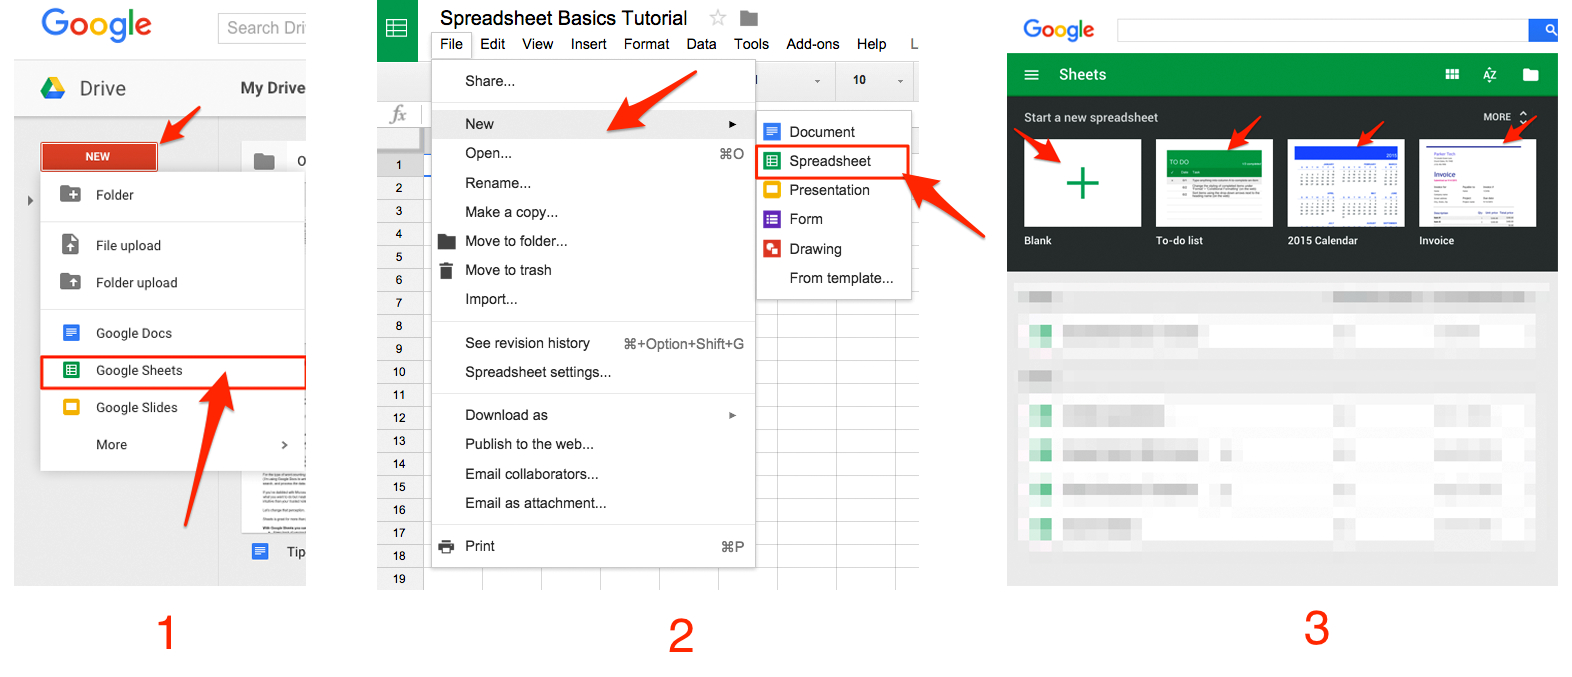 How Do I Create A Spreadsheet On Google Docs With Google Sheets 101: The Beginner's Guide To Online Spreadsheets  The